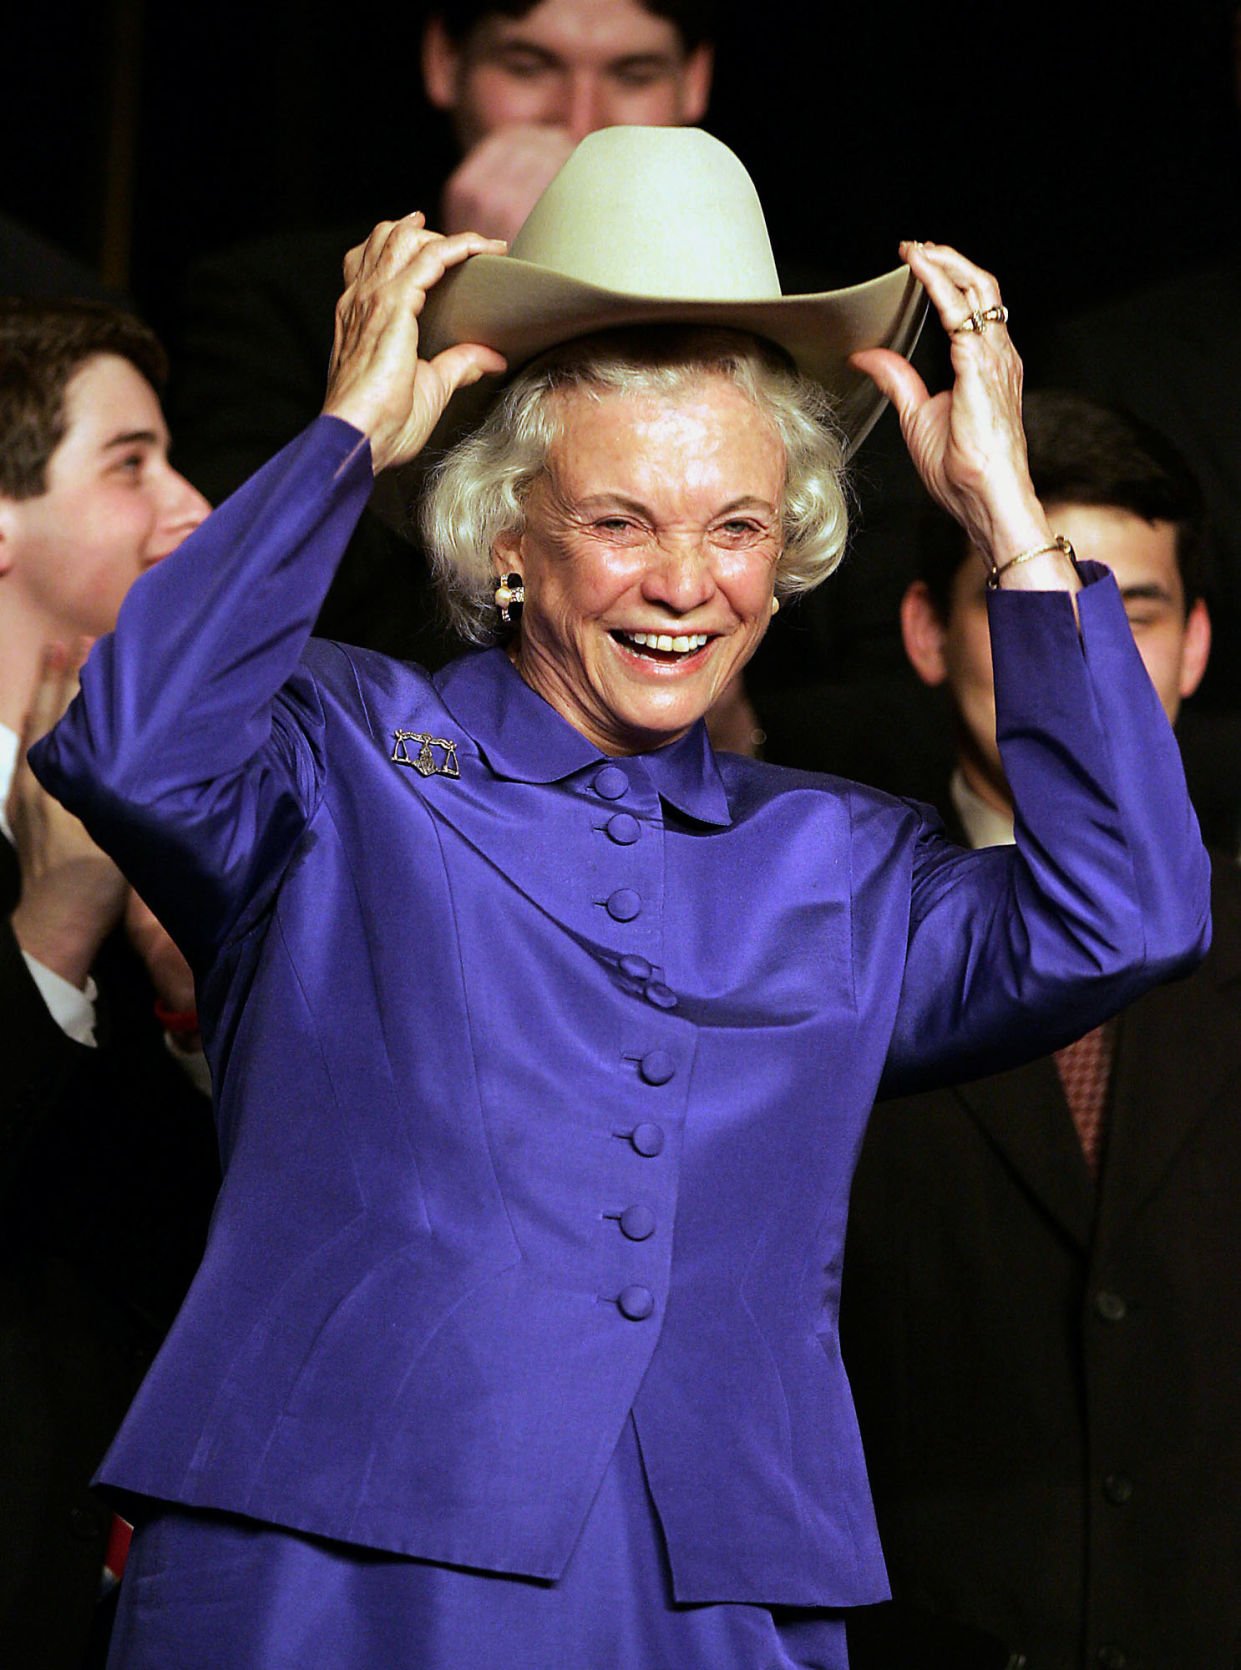 facts about sandra day o connor